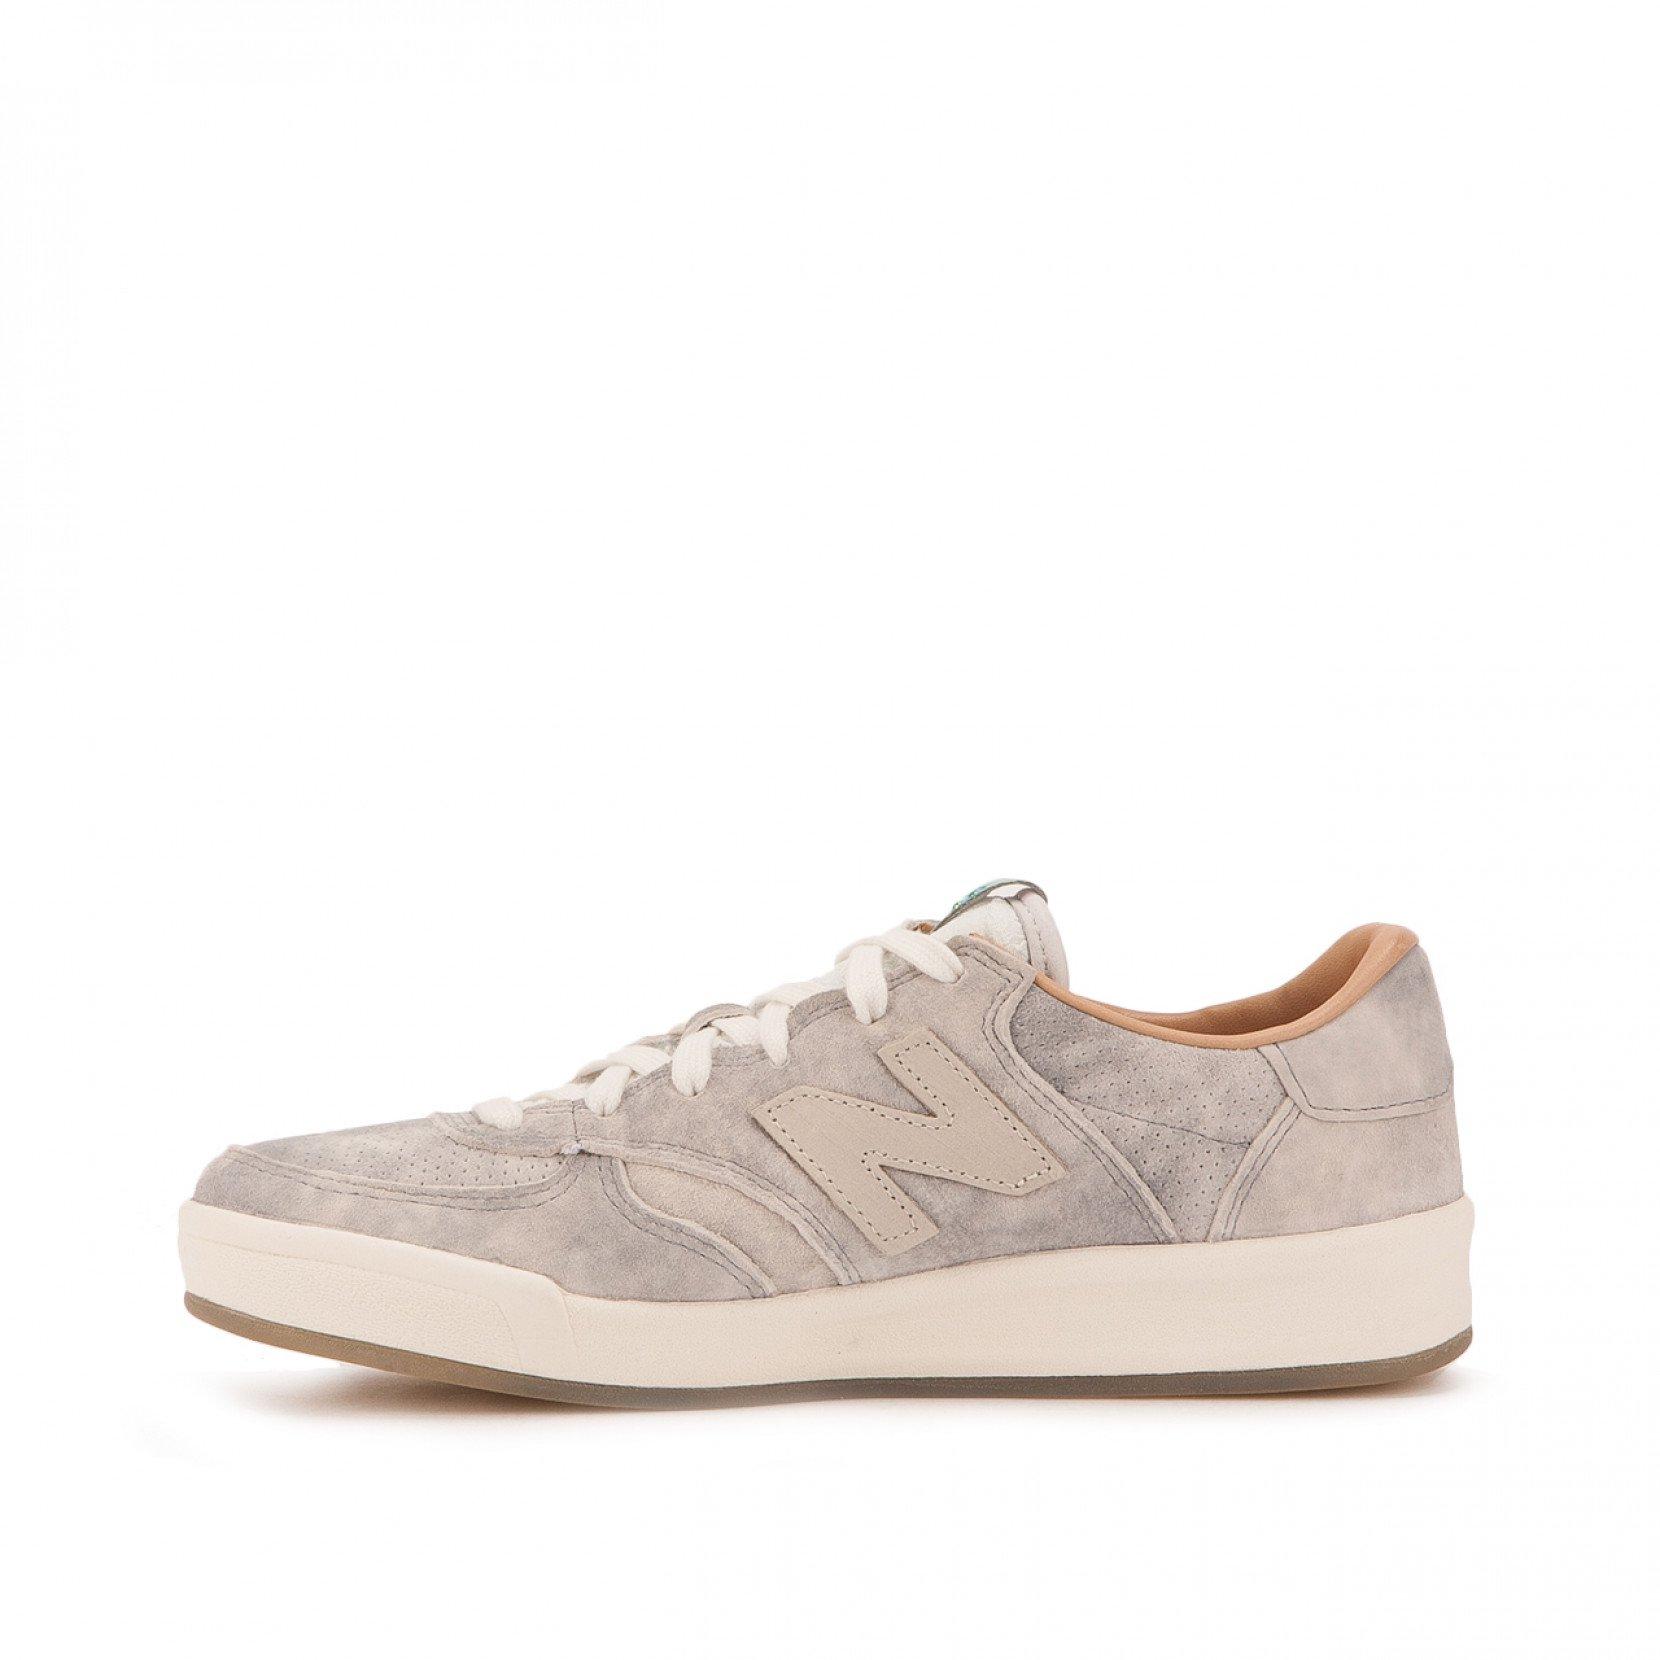 New Balance Suede Wrt 300 Gd in Grey (Gray) - Lyst